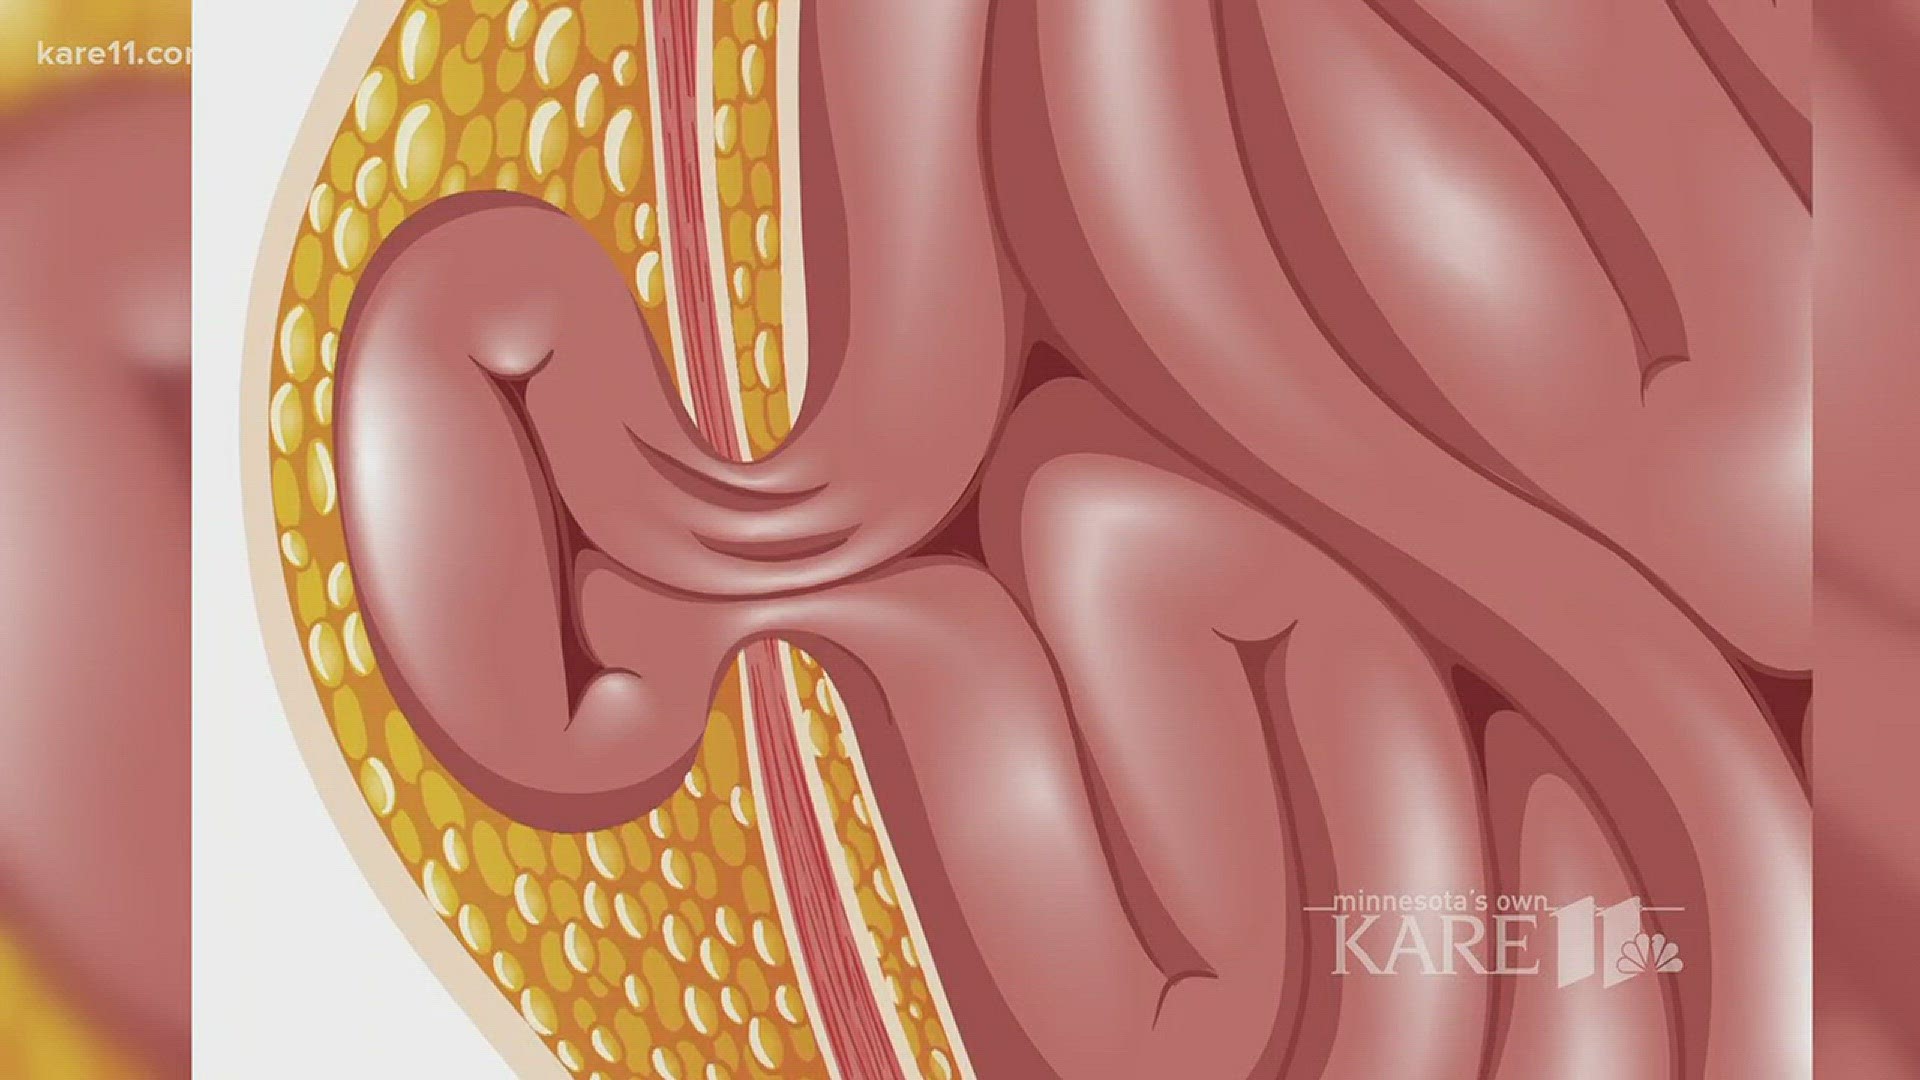 So what exactly is a hernia? http://kare11.tv/2FjNlp9